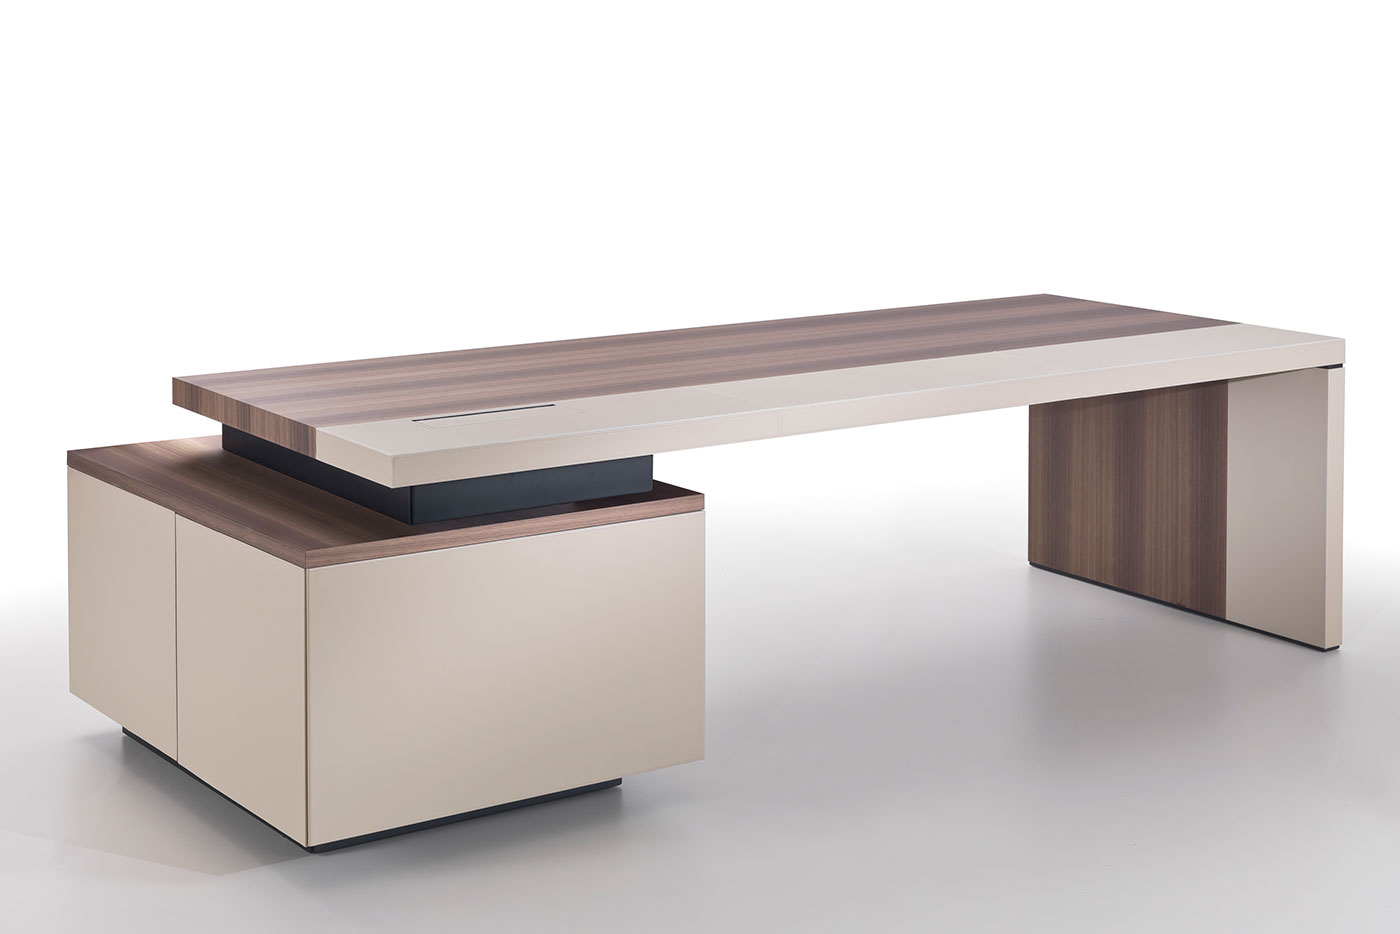 Warm materials and colours. Luxurious saddle leather and eucalyptus essence are used by Matteo Nunziati to create Kefa executive desk. Free delivery.